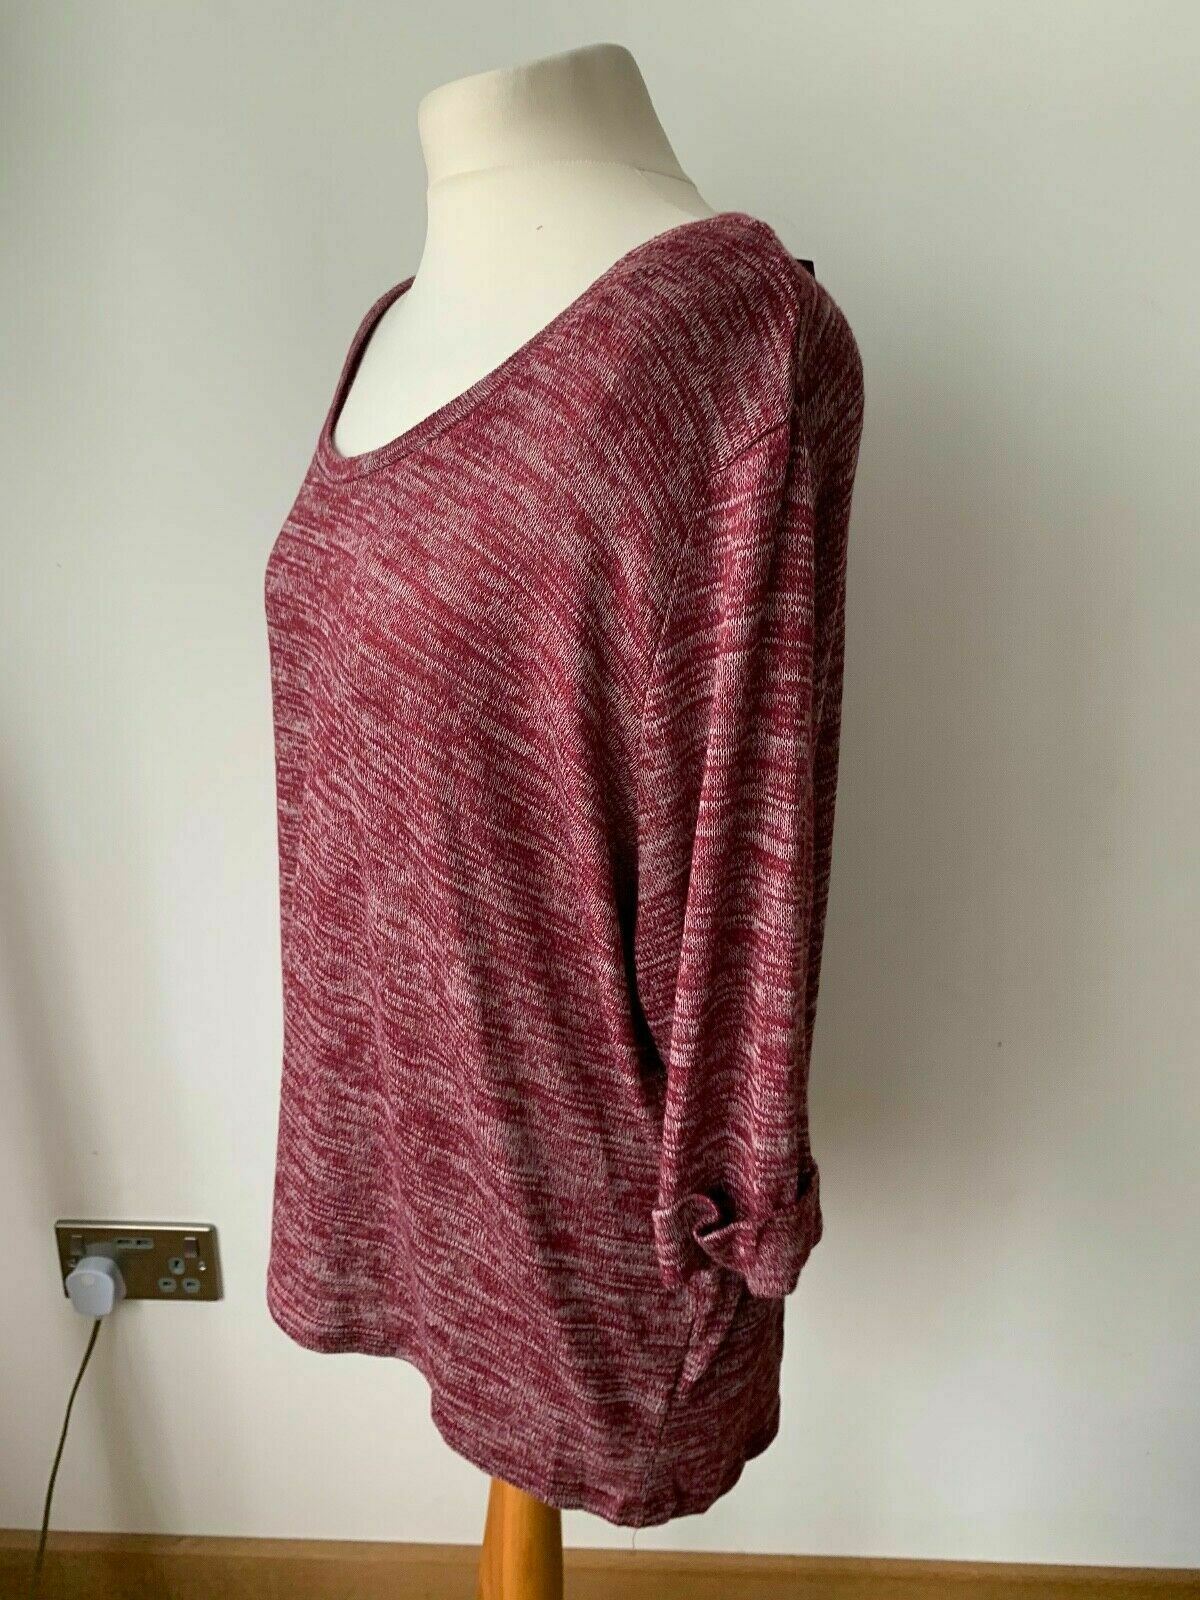 New Look Burgundy Lightweight Knit Short Sleeve Jumper Sizes 22 and 20 available